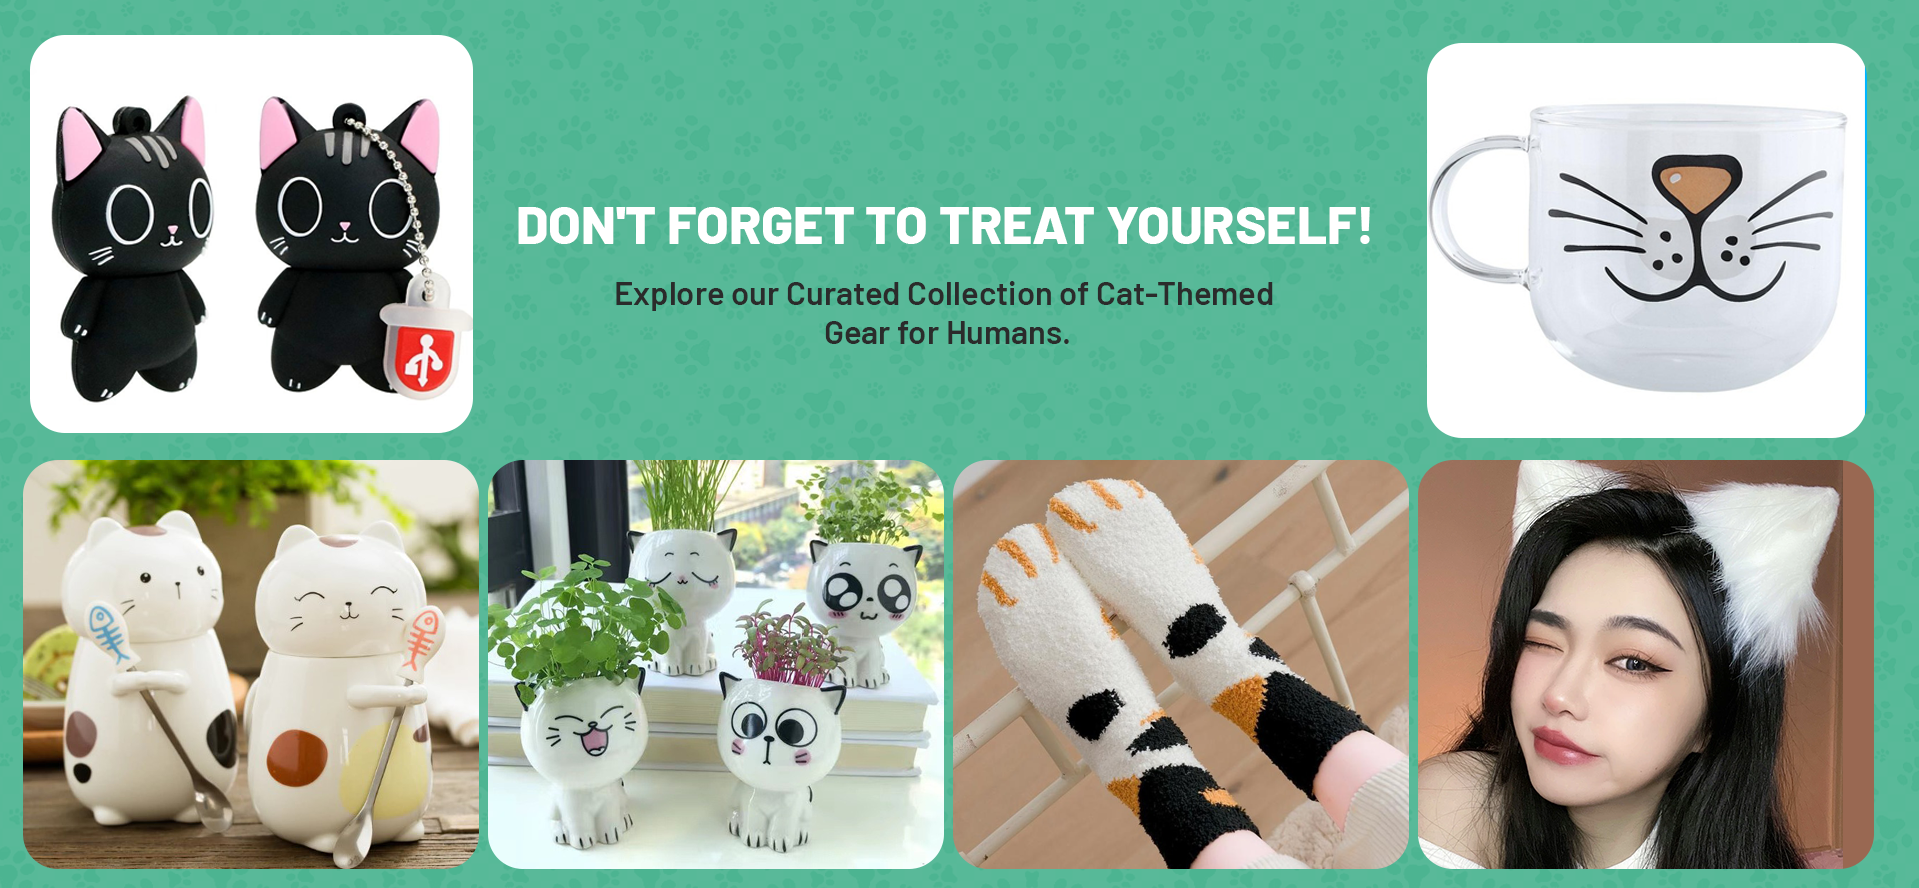 https://theculturedcat.com/wp-content/uploads/2022/06/human-accessories-treat-yourself.png